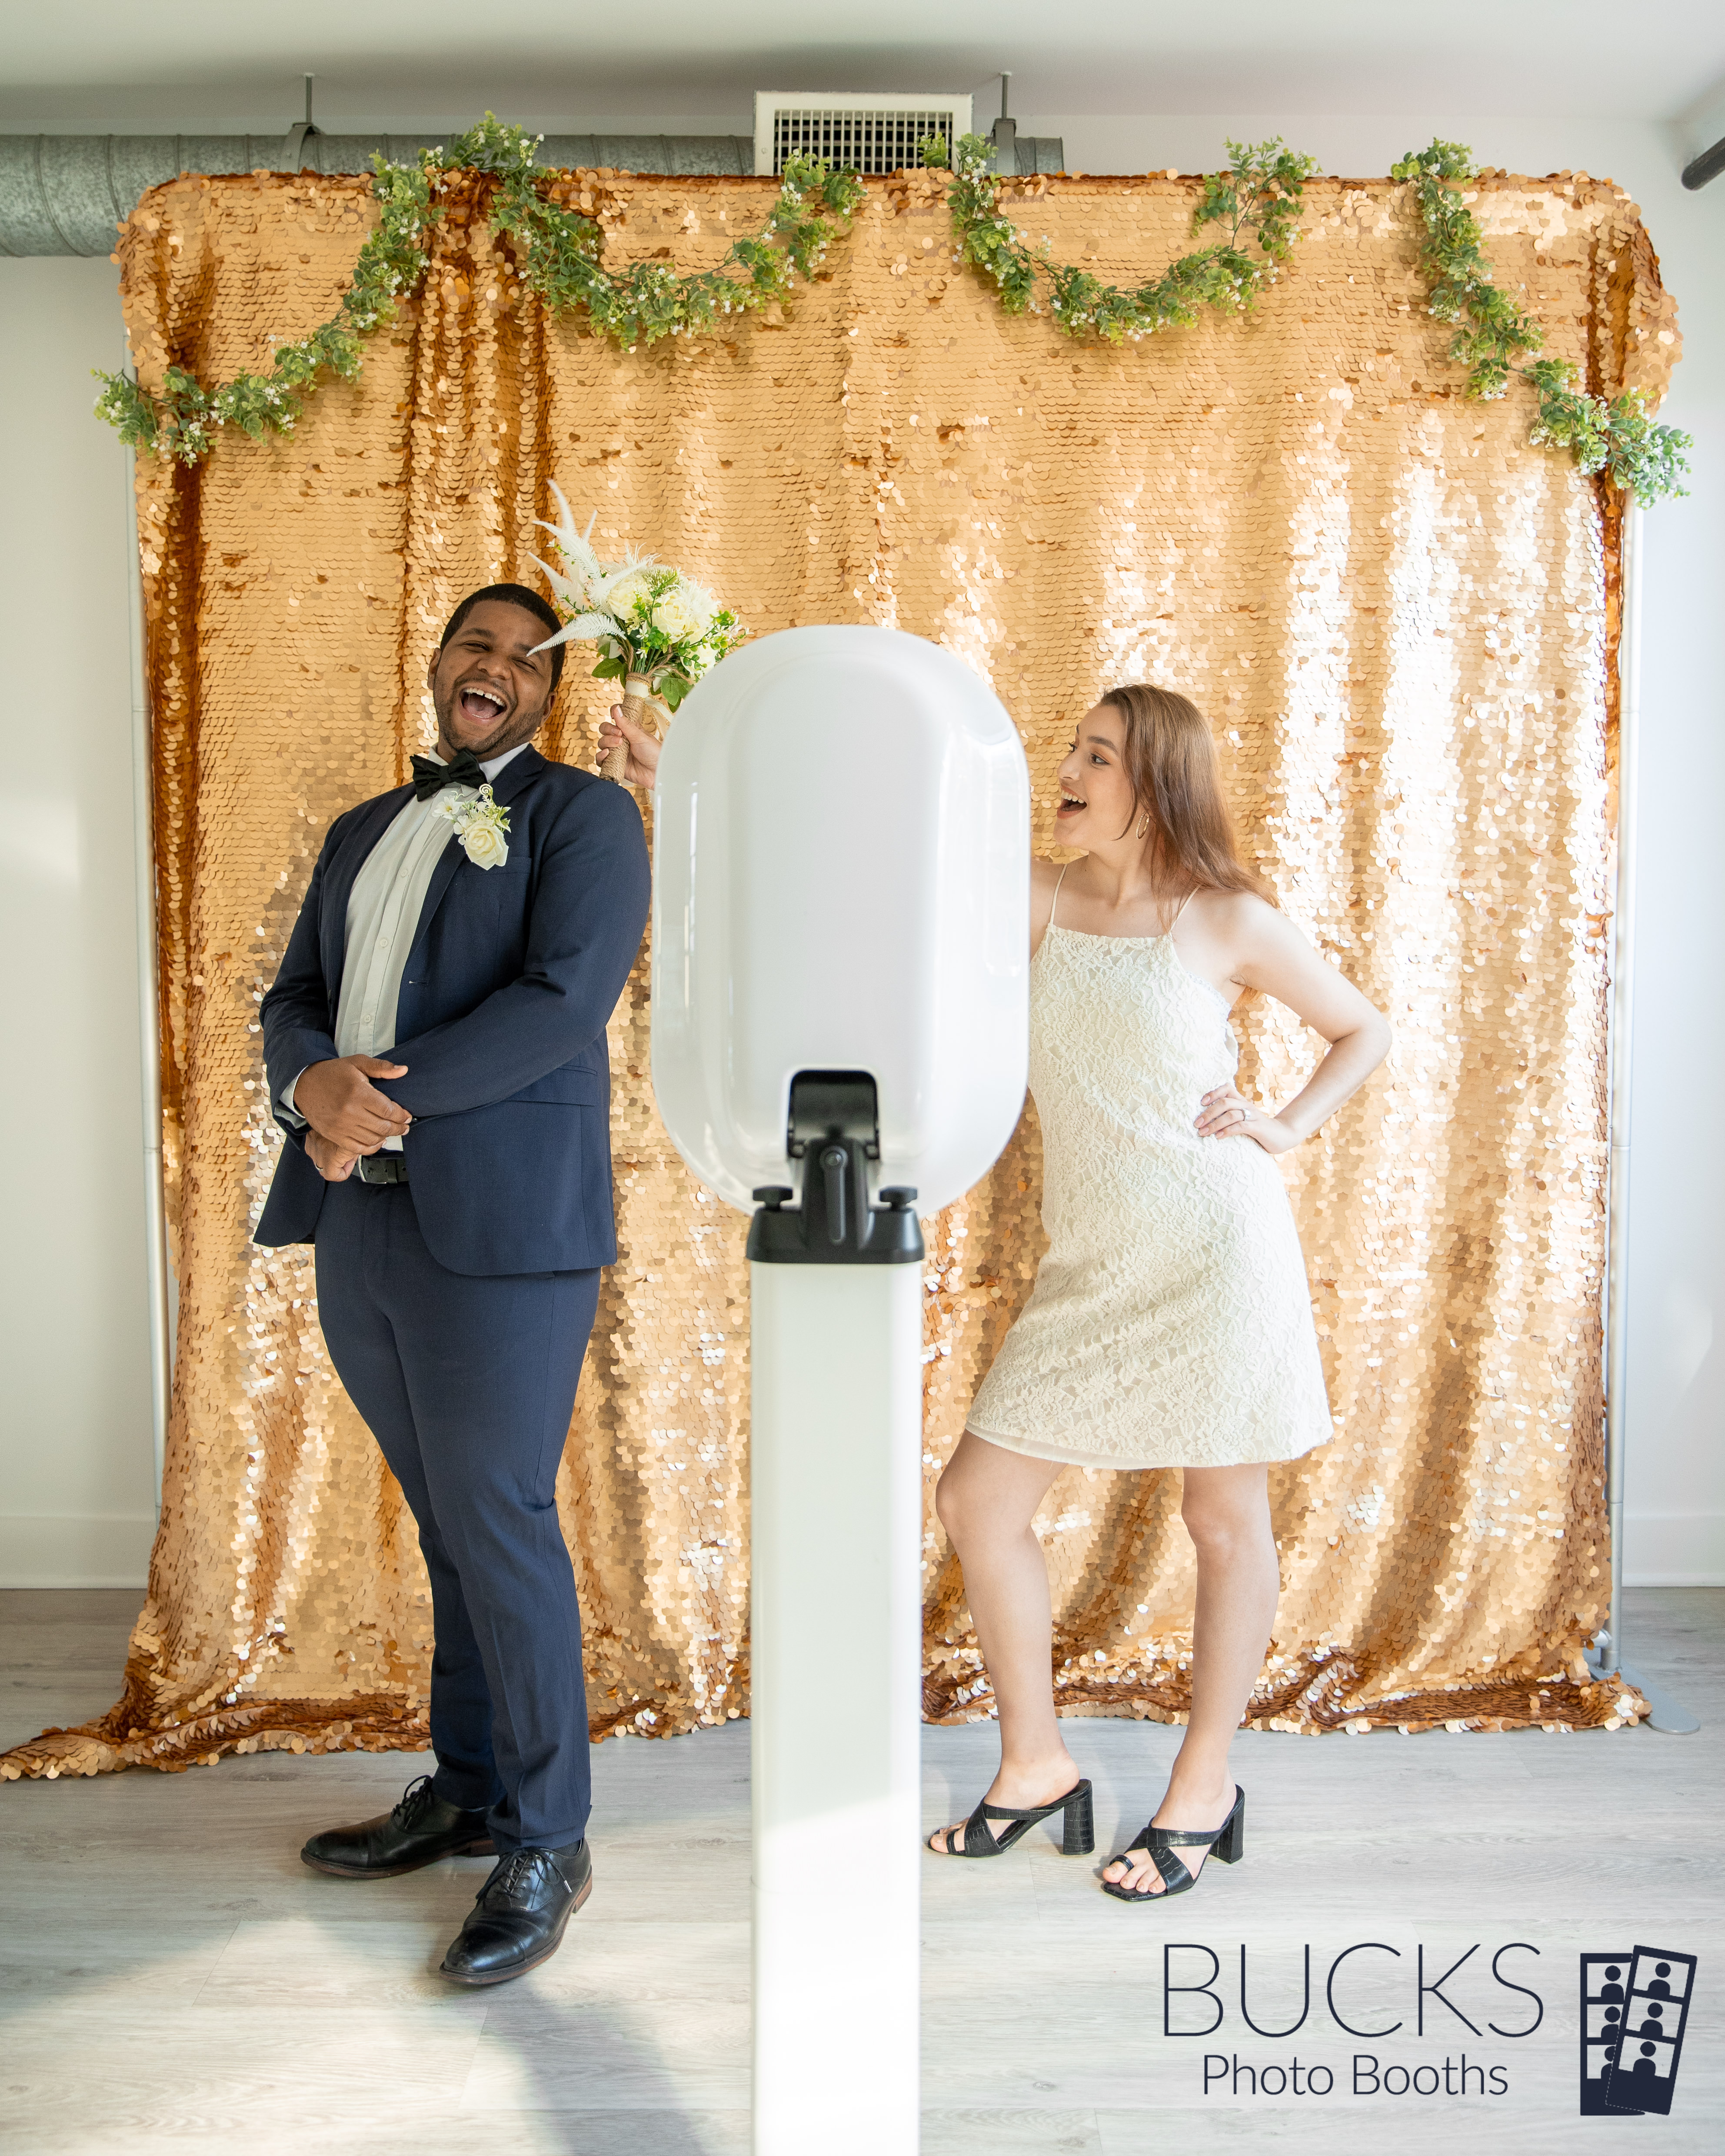 Digital Photo Booth Rental With Gold Backdrop Bucks Photo Booths